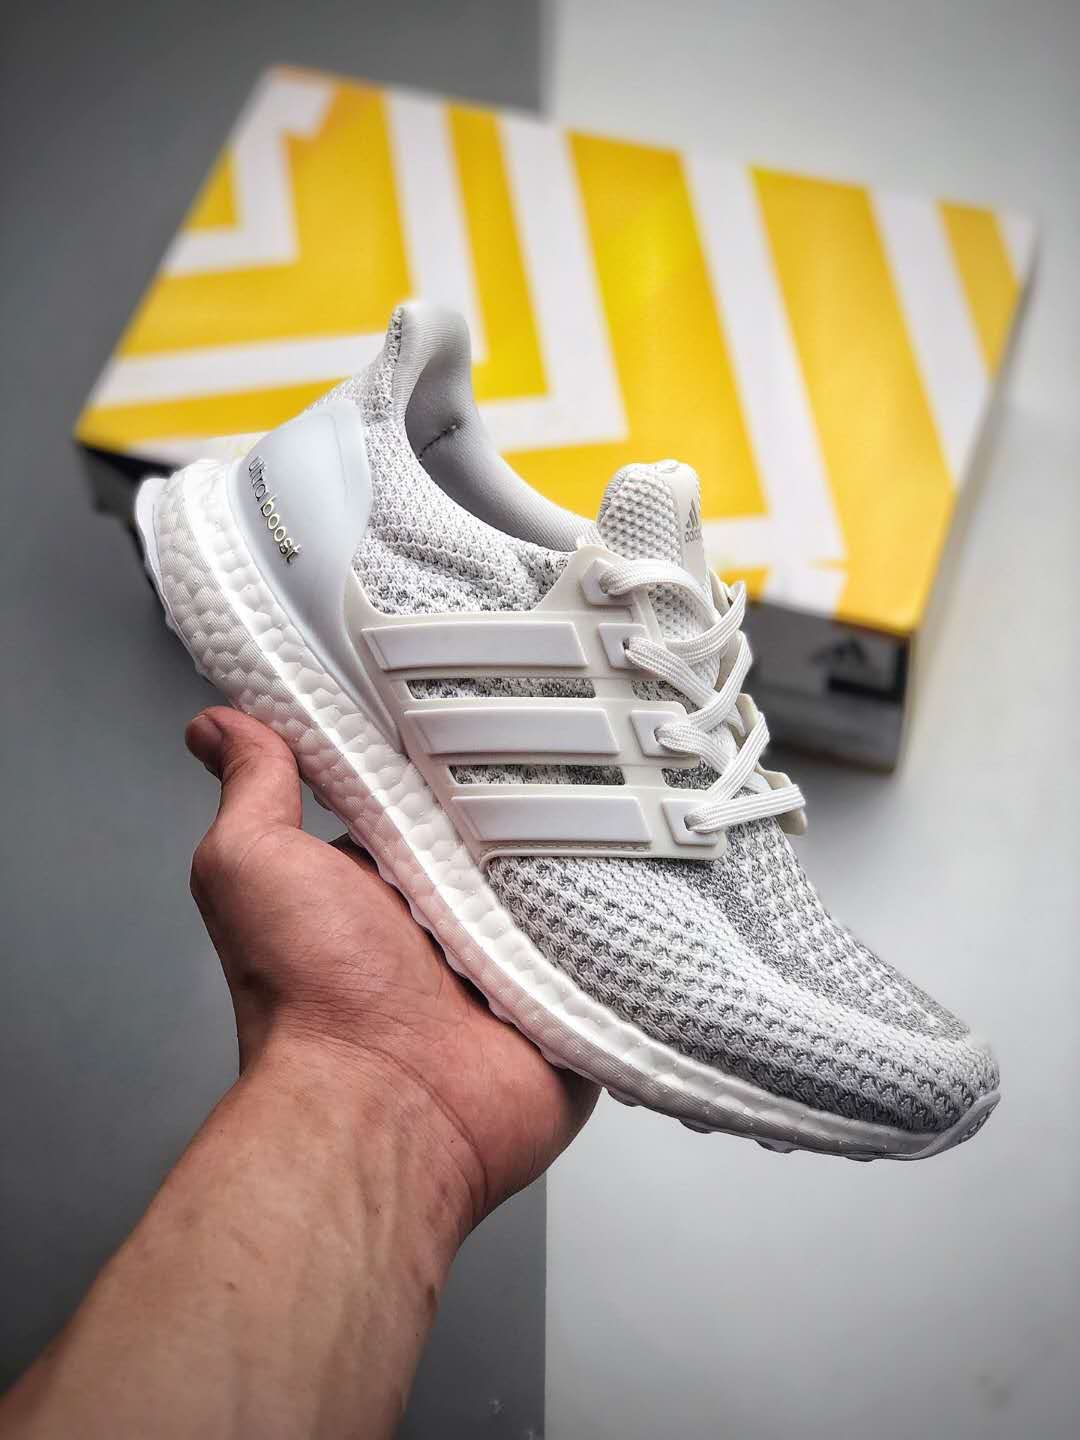 Adidas UltraBoost 2.0 Limited White Reflective - Shop Now!